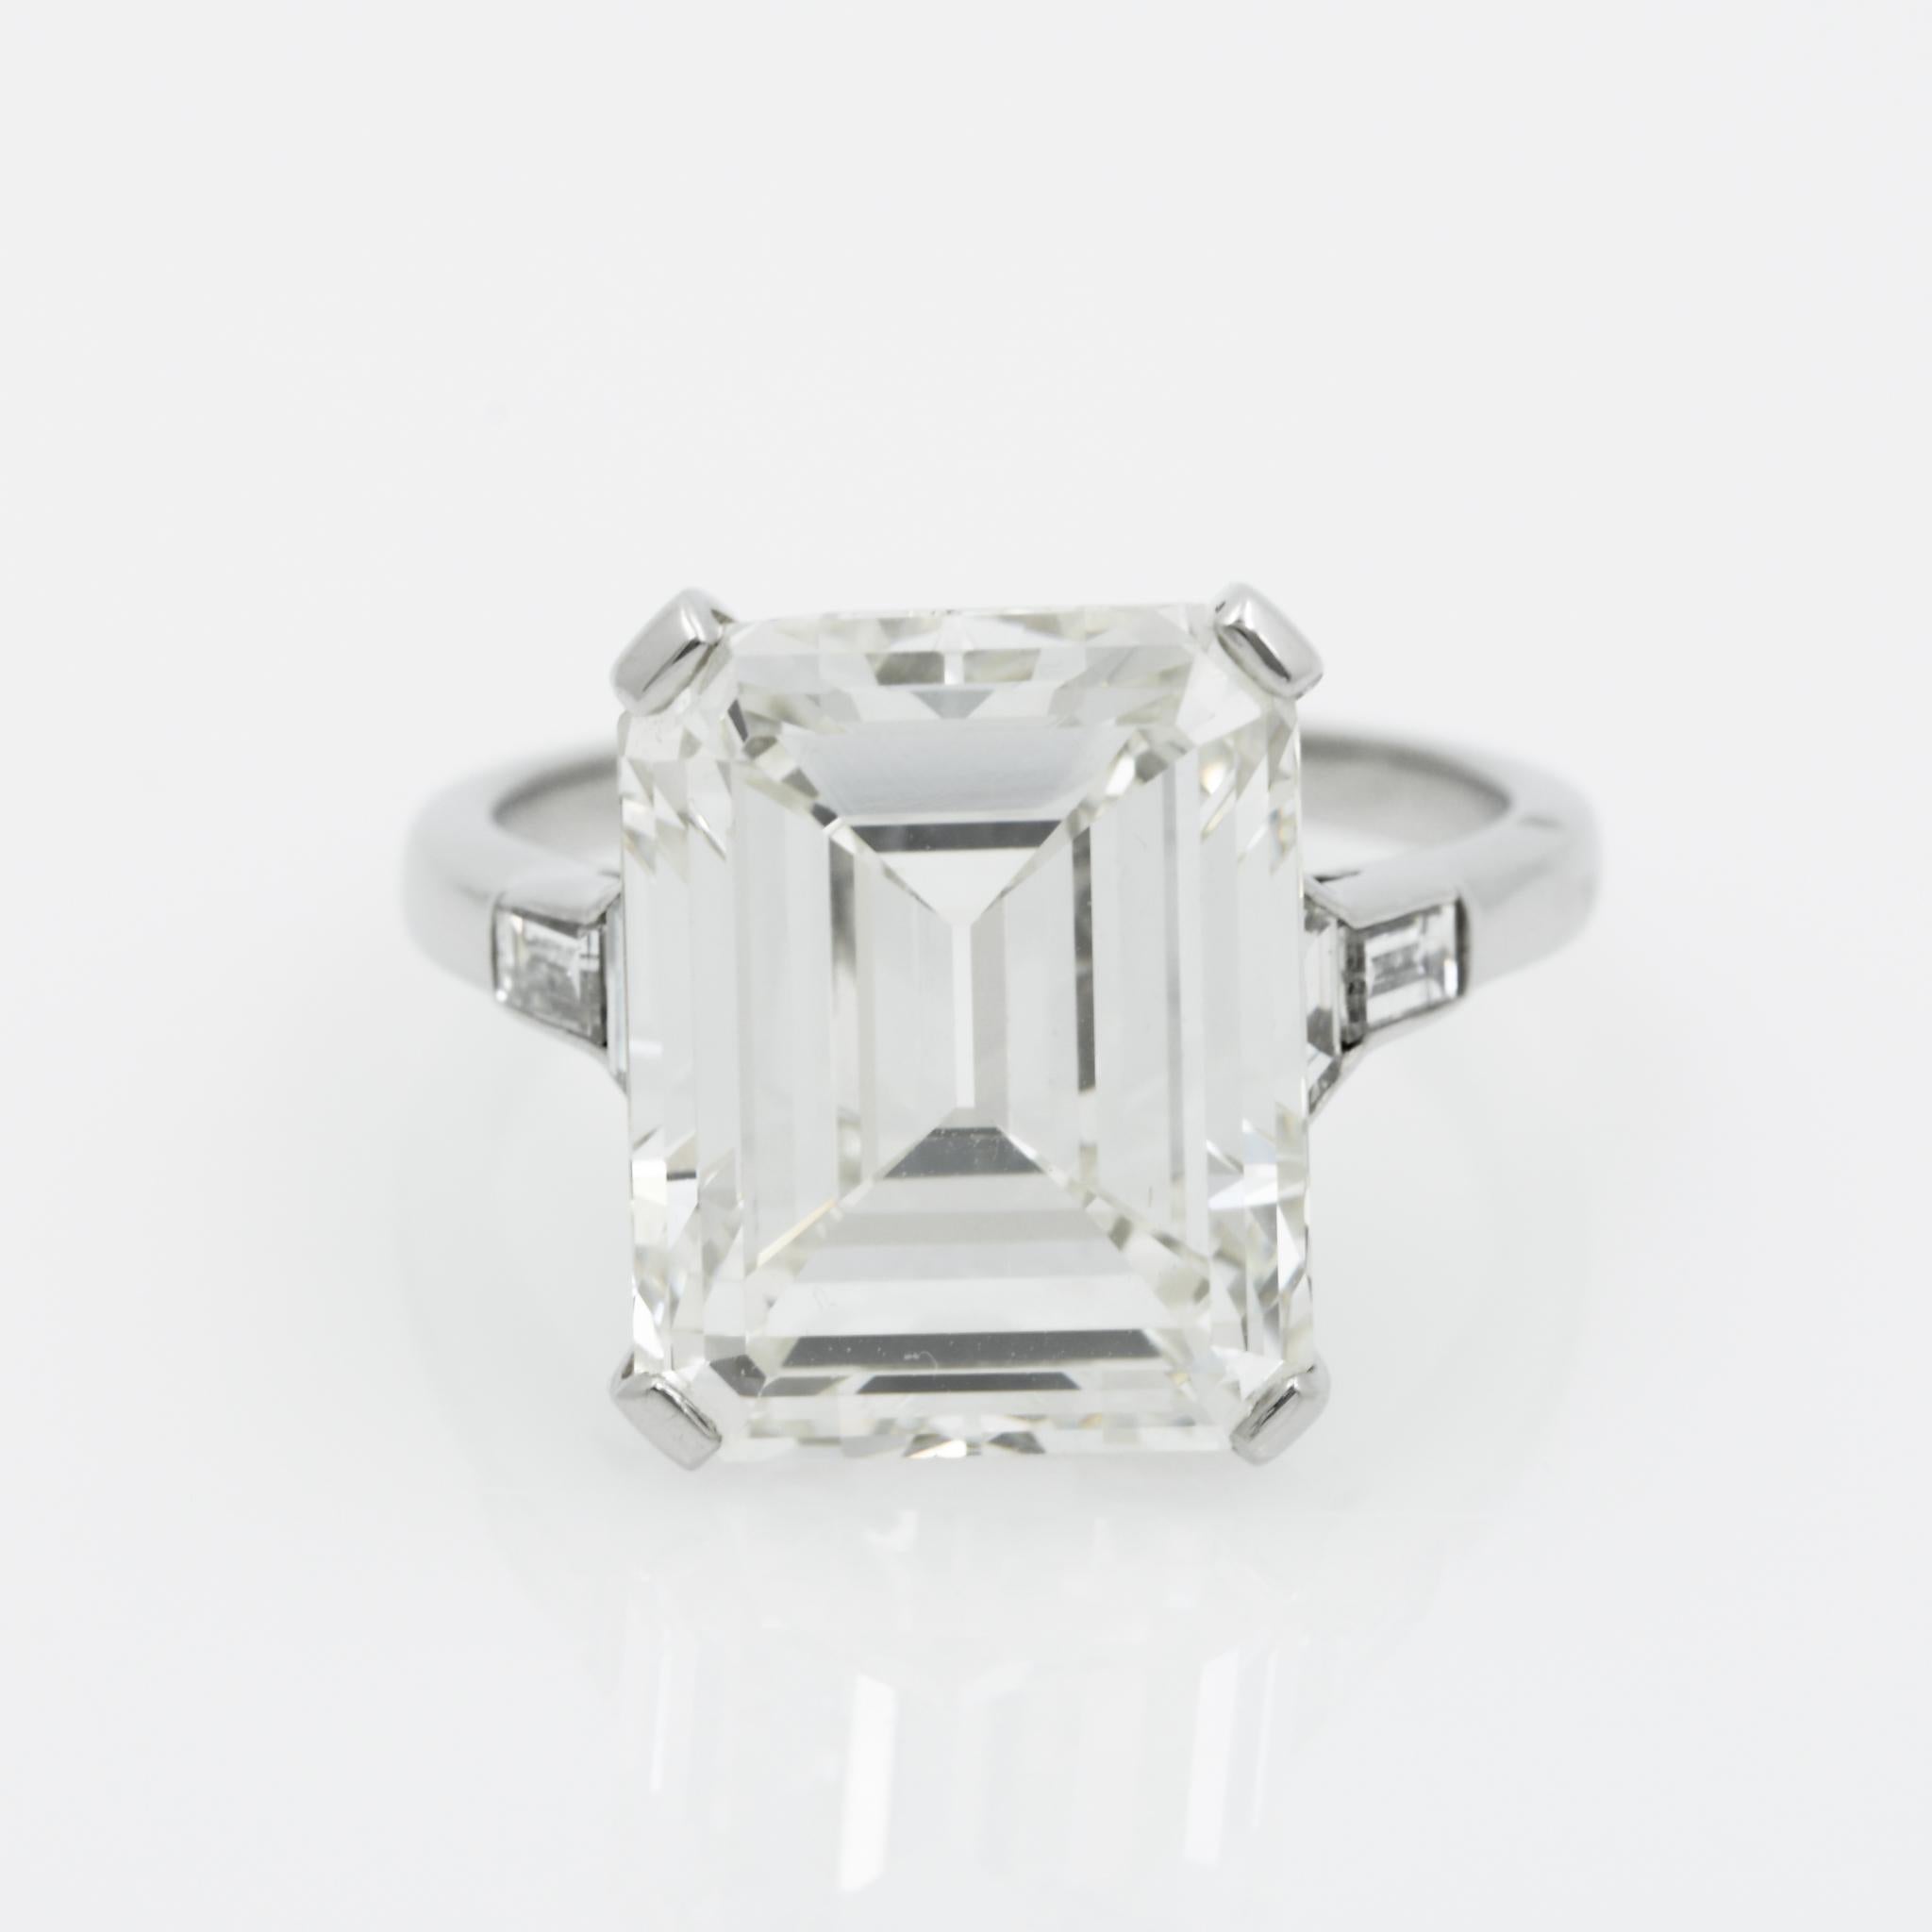 This platinum five stone ring features a 9.66 carat Emerald cut diamond that has K color and S1 clarity, and is GIA certified. It also showcases two trapezoid and two tapered baguette diamonds with a combined total weight of 0.32 carats with I-J